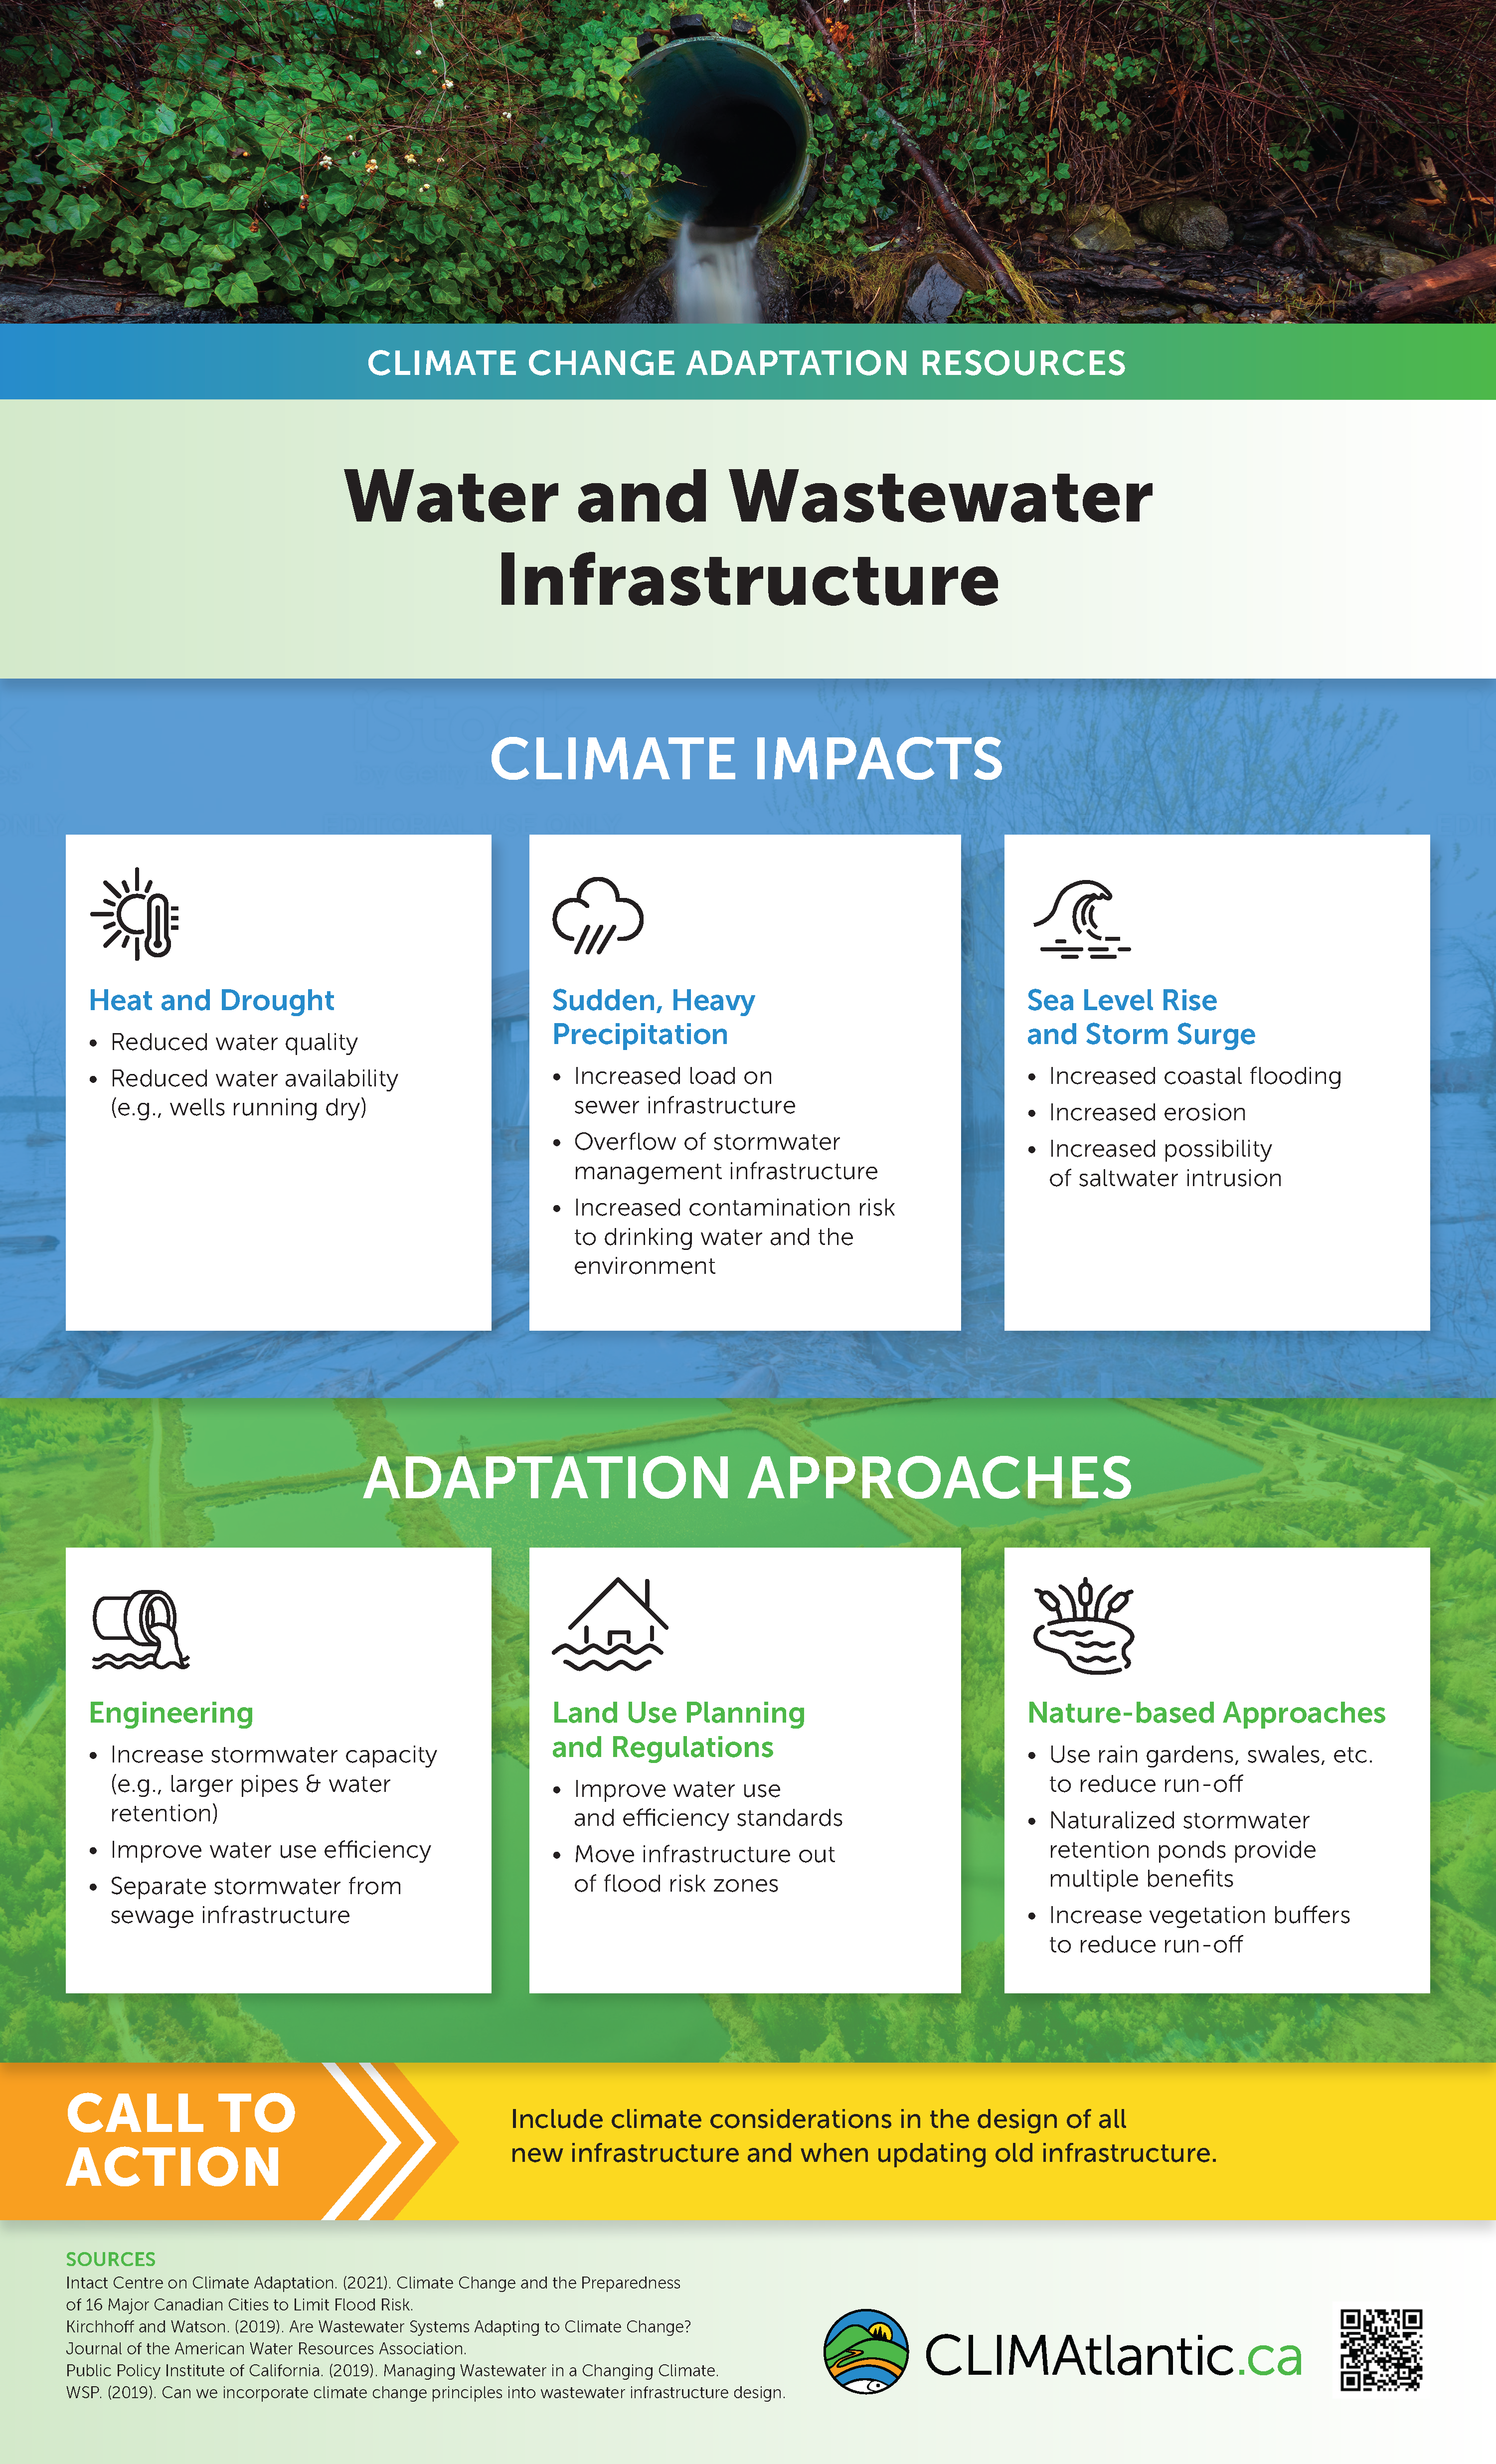 An infographic explaining the impacts of climate change on water and wastewater infrastructure and suggested adaptation approaches. Click for full infographic.